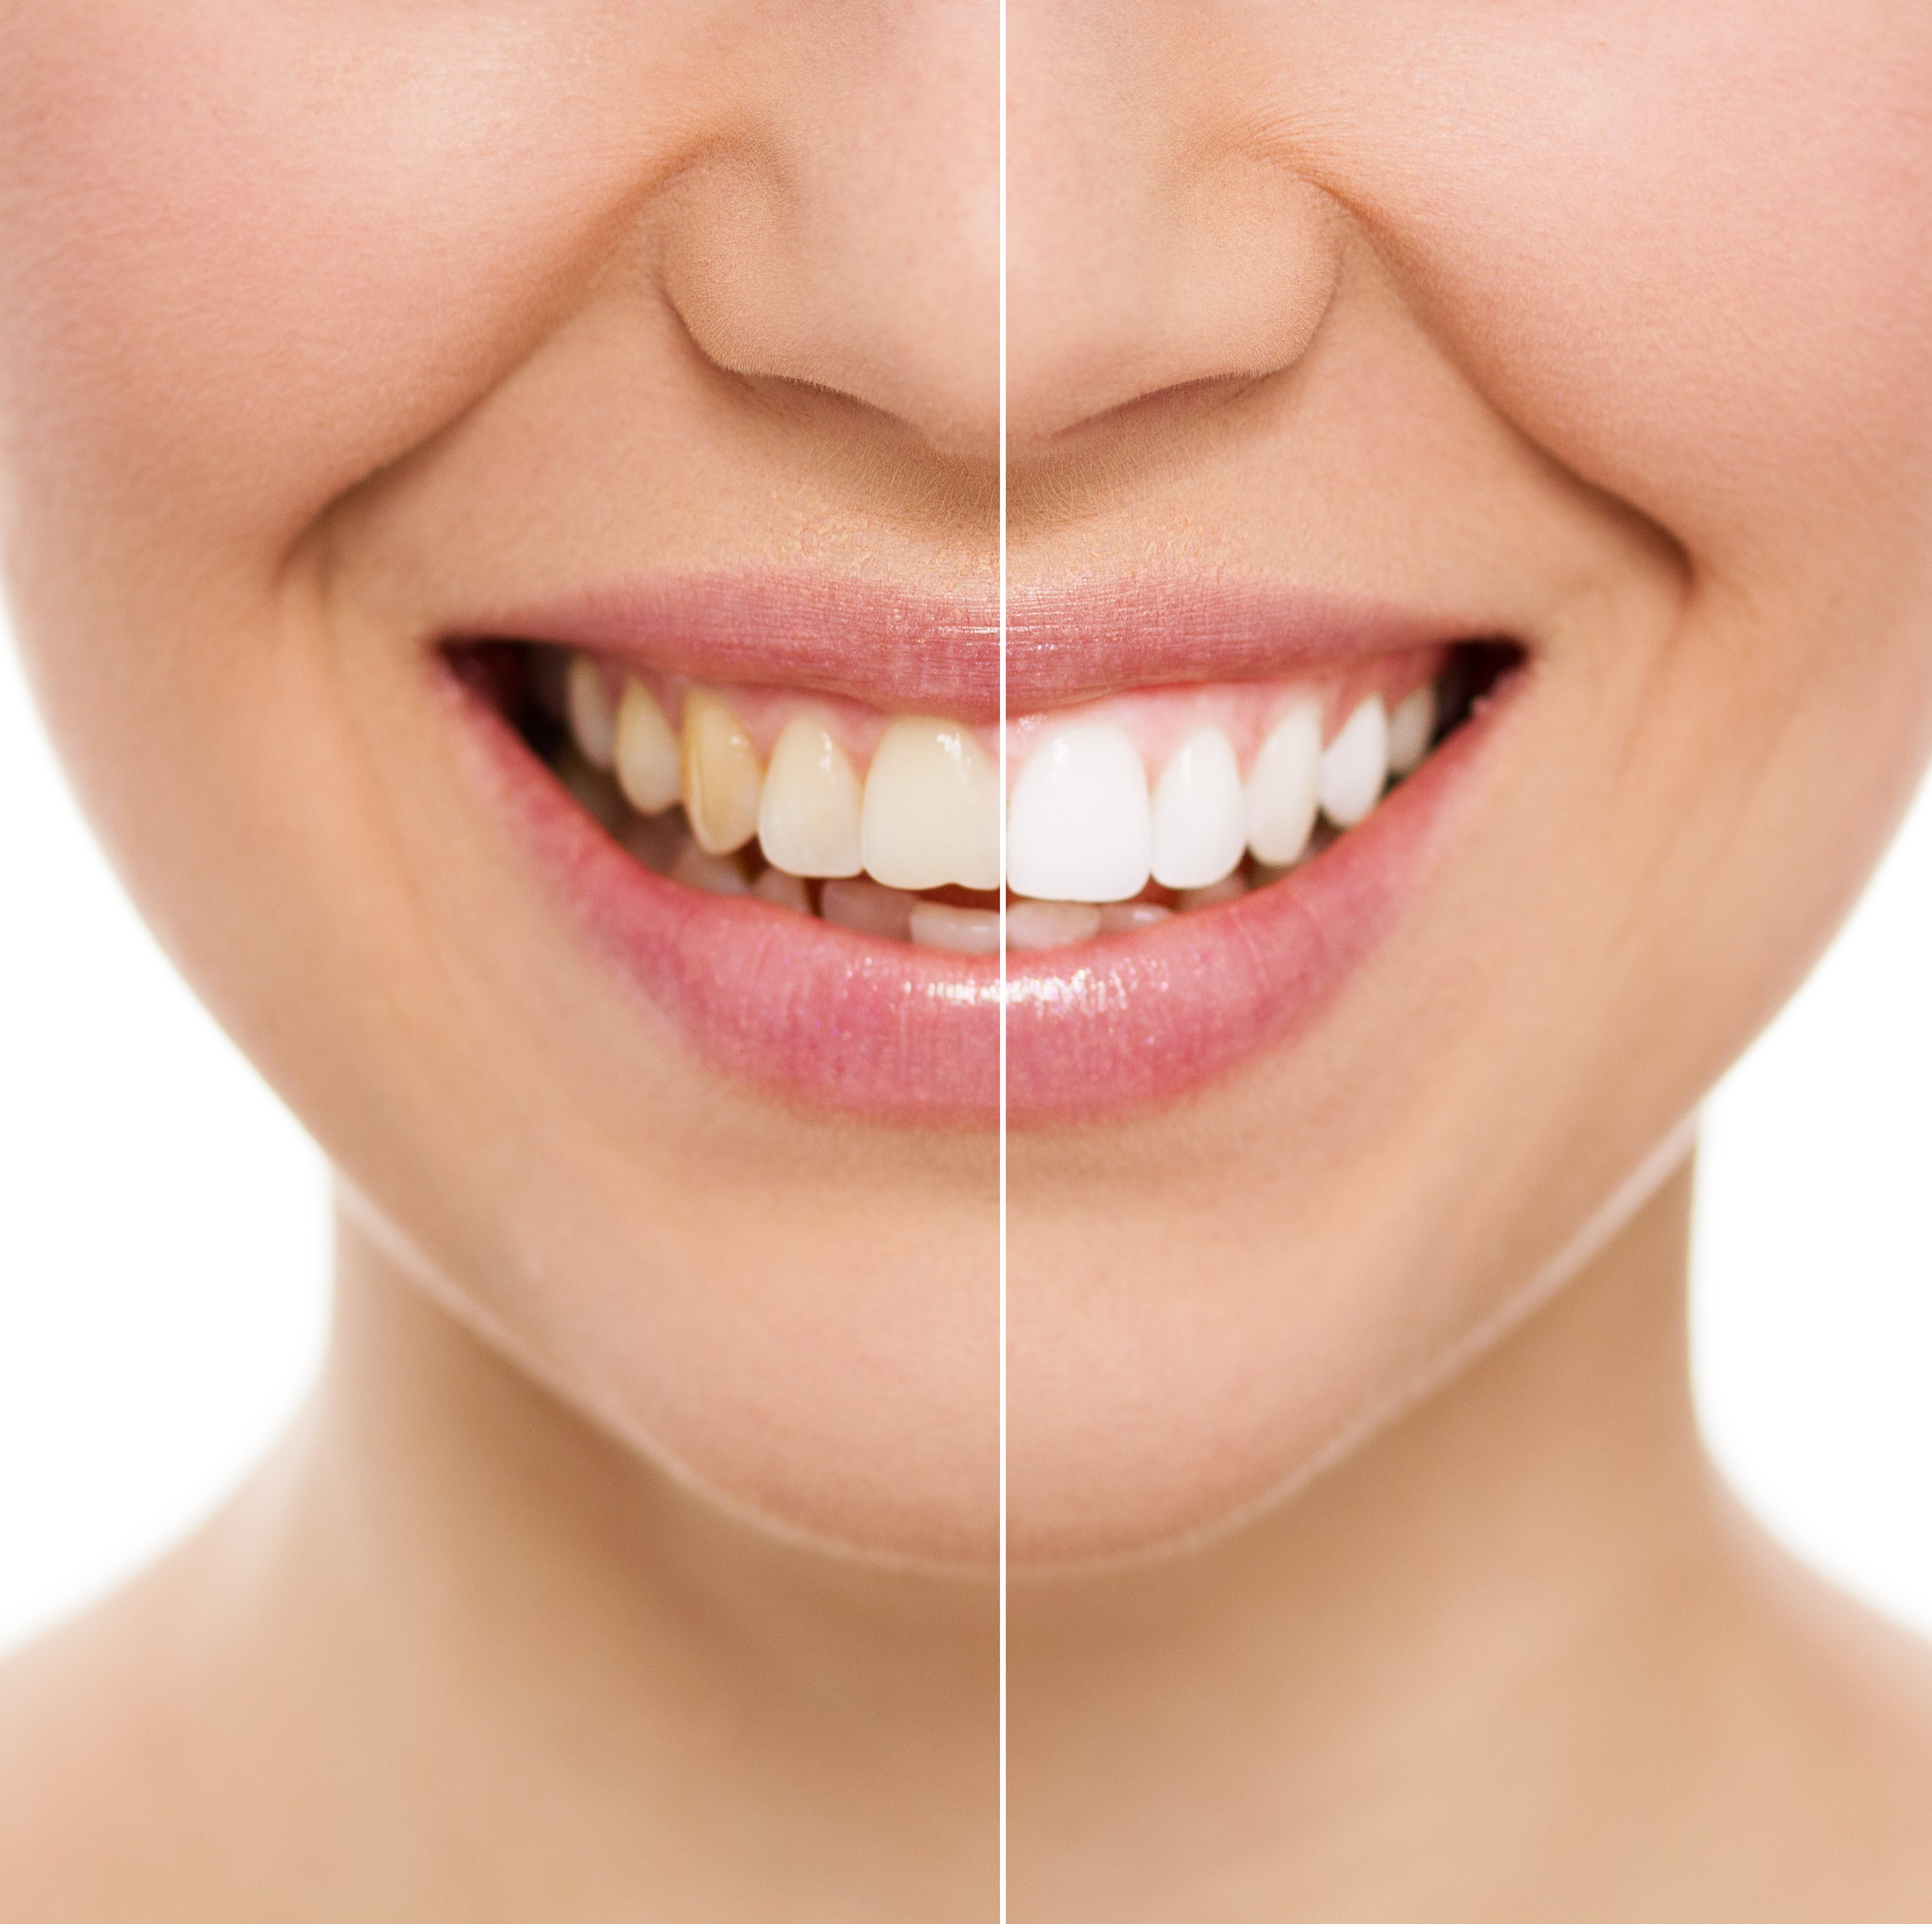 Before and after a cosmetic dentistry procedure